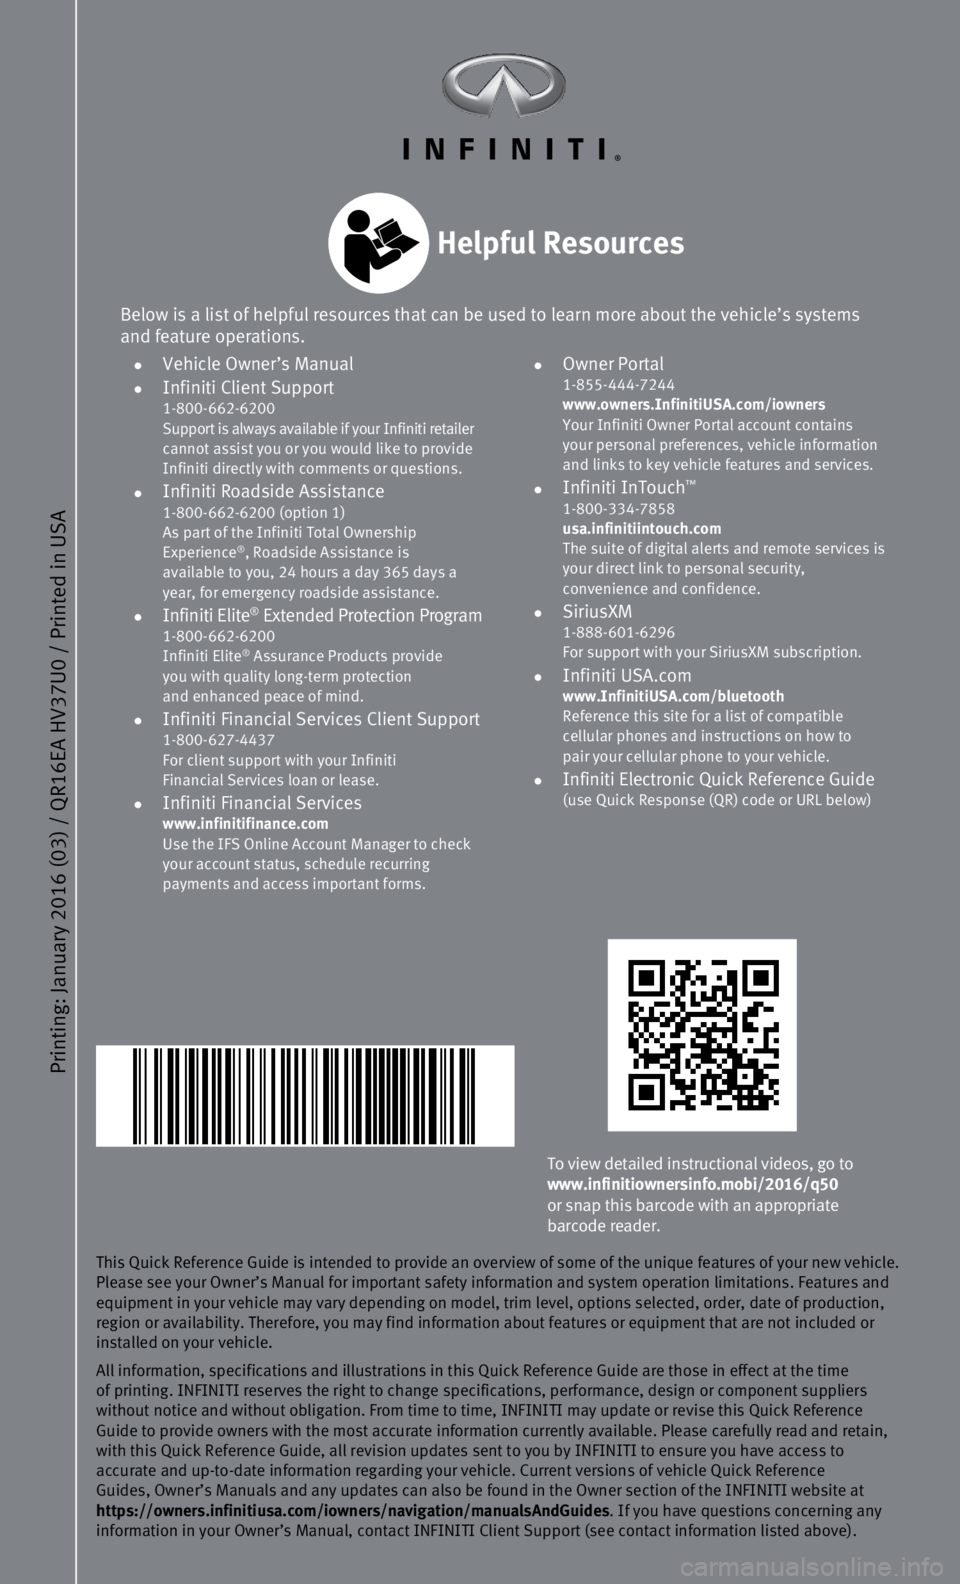 INFINITI Q50 HYBRID 2016  Quick Reference Guide Printing: January 2016 (03) / QR16EA HV37U0 / Printed in USA 
To view detailed instructional videos, go to 
www.infinitiownersinfo.mobi/2016/q50 
or snap this barcode with an appropriate 
barcode read